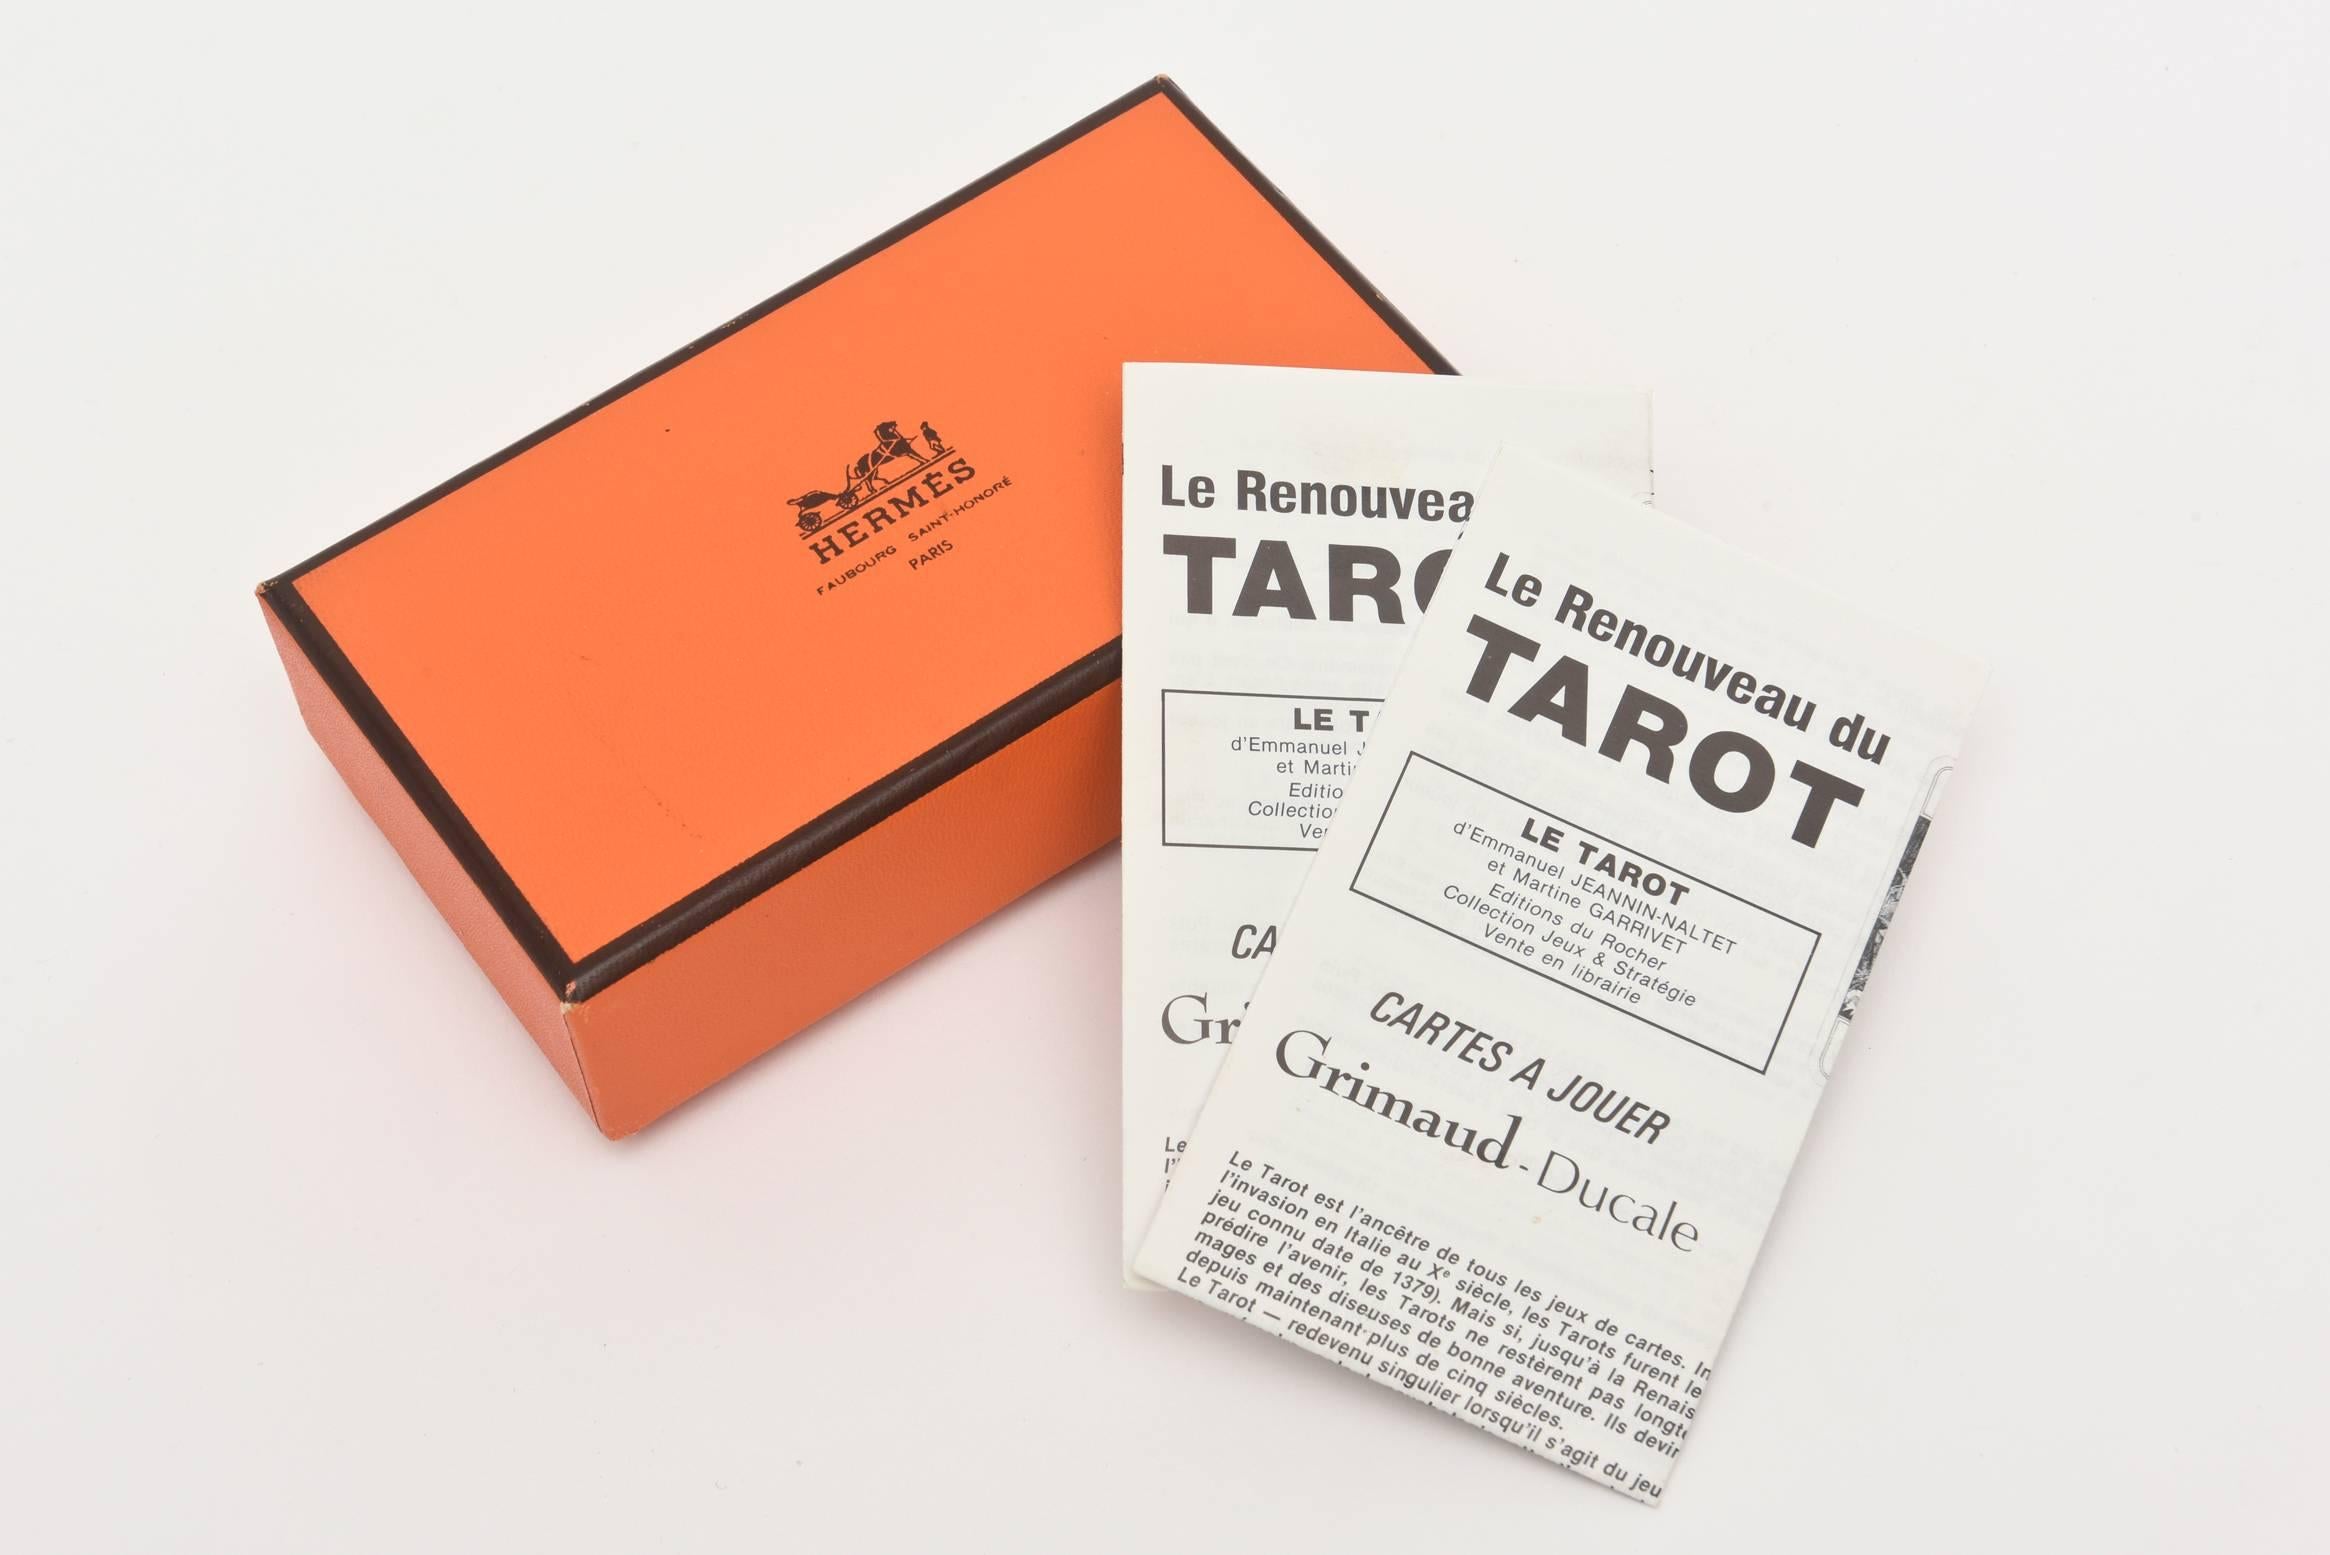 For the tarot reader or the gift giver, this set of lovely Hermes tarot cards is a must. They are rare and authentic and in their original box and also has it’s own Hermes paper bag
A great desk accessory.